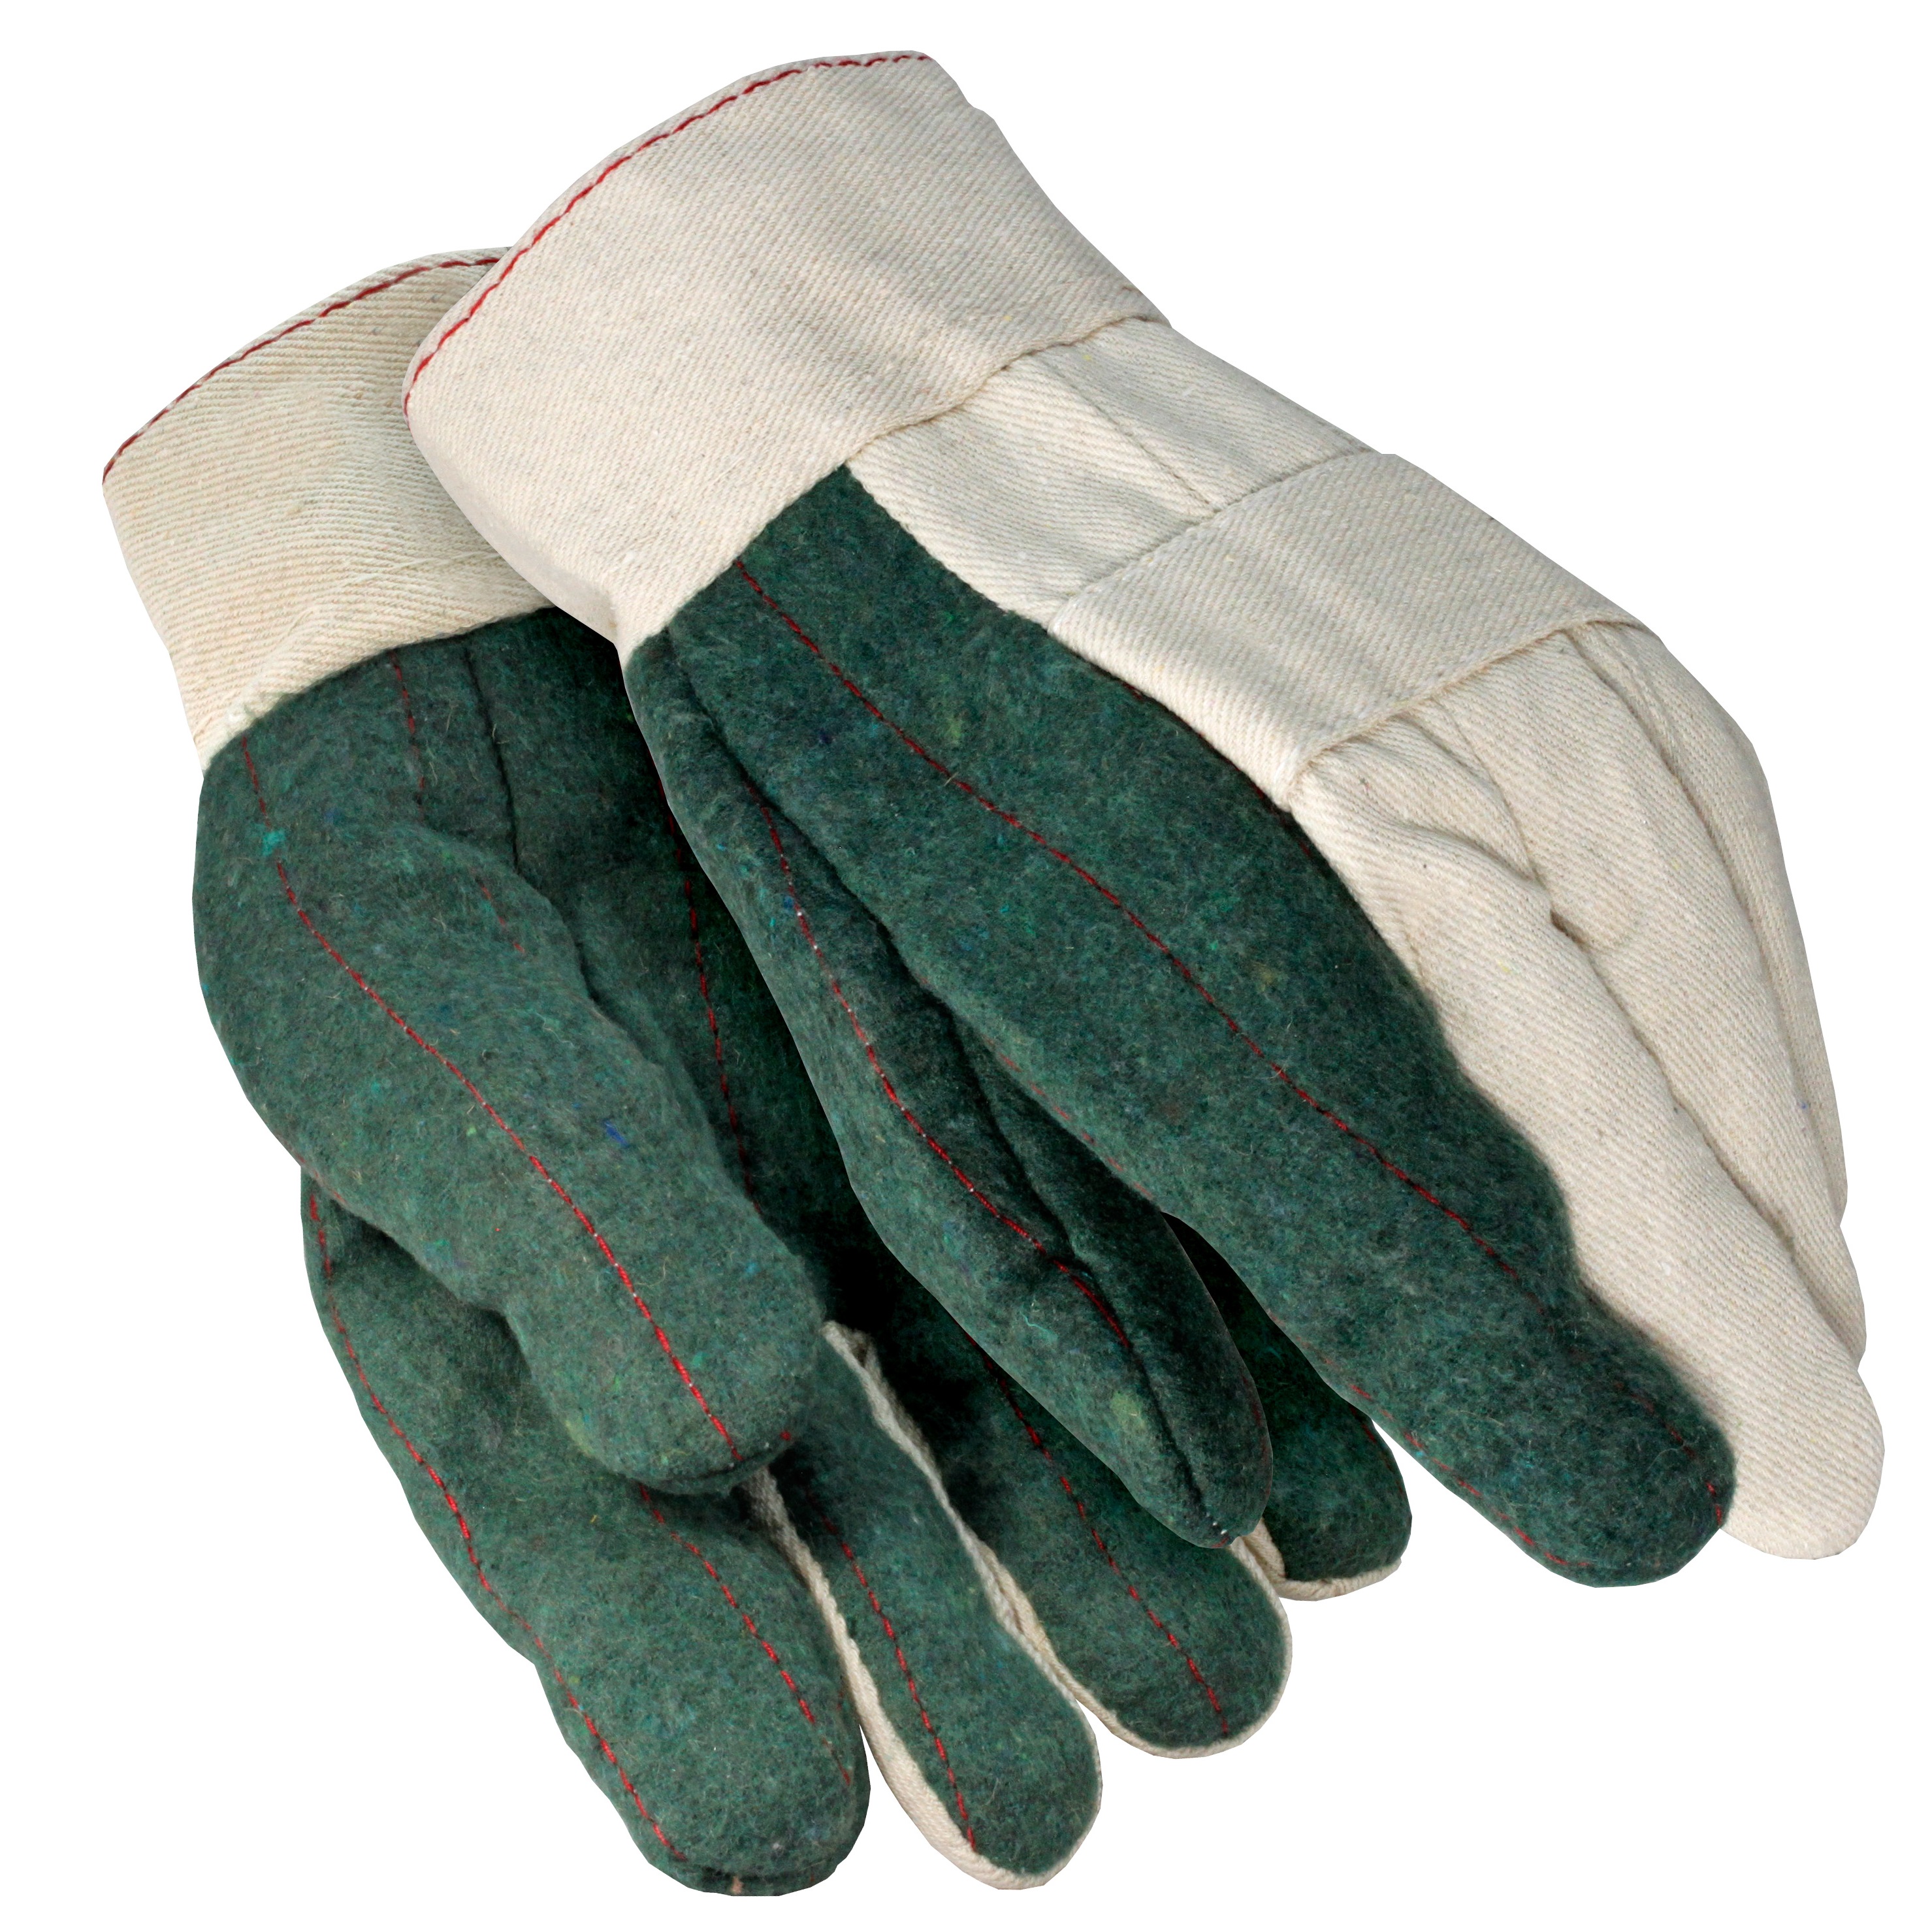 3 Layer Hot Mill Gloves, Band Top Cuff